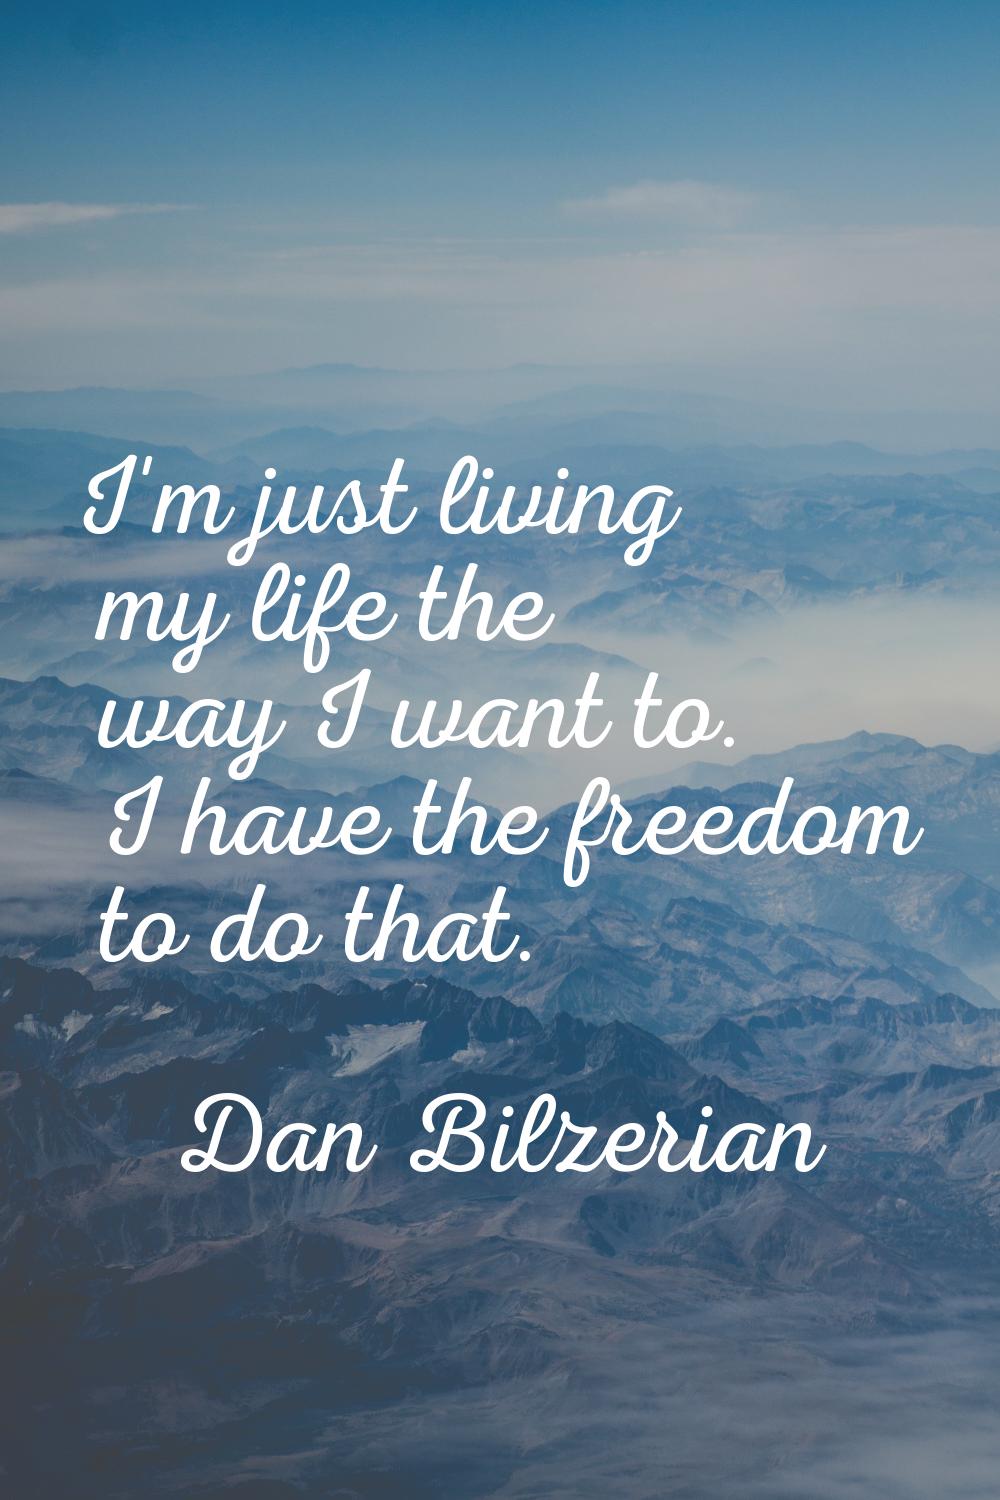 I'm just living my life the way I want to. I have the freedom to do that.